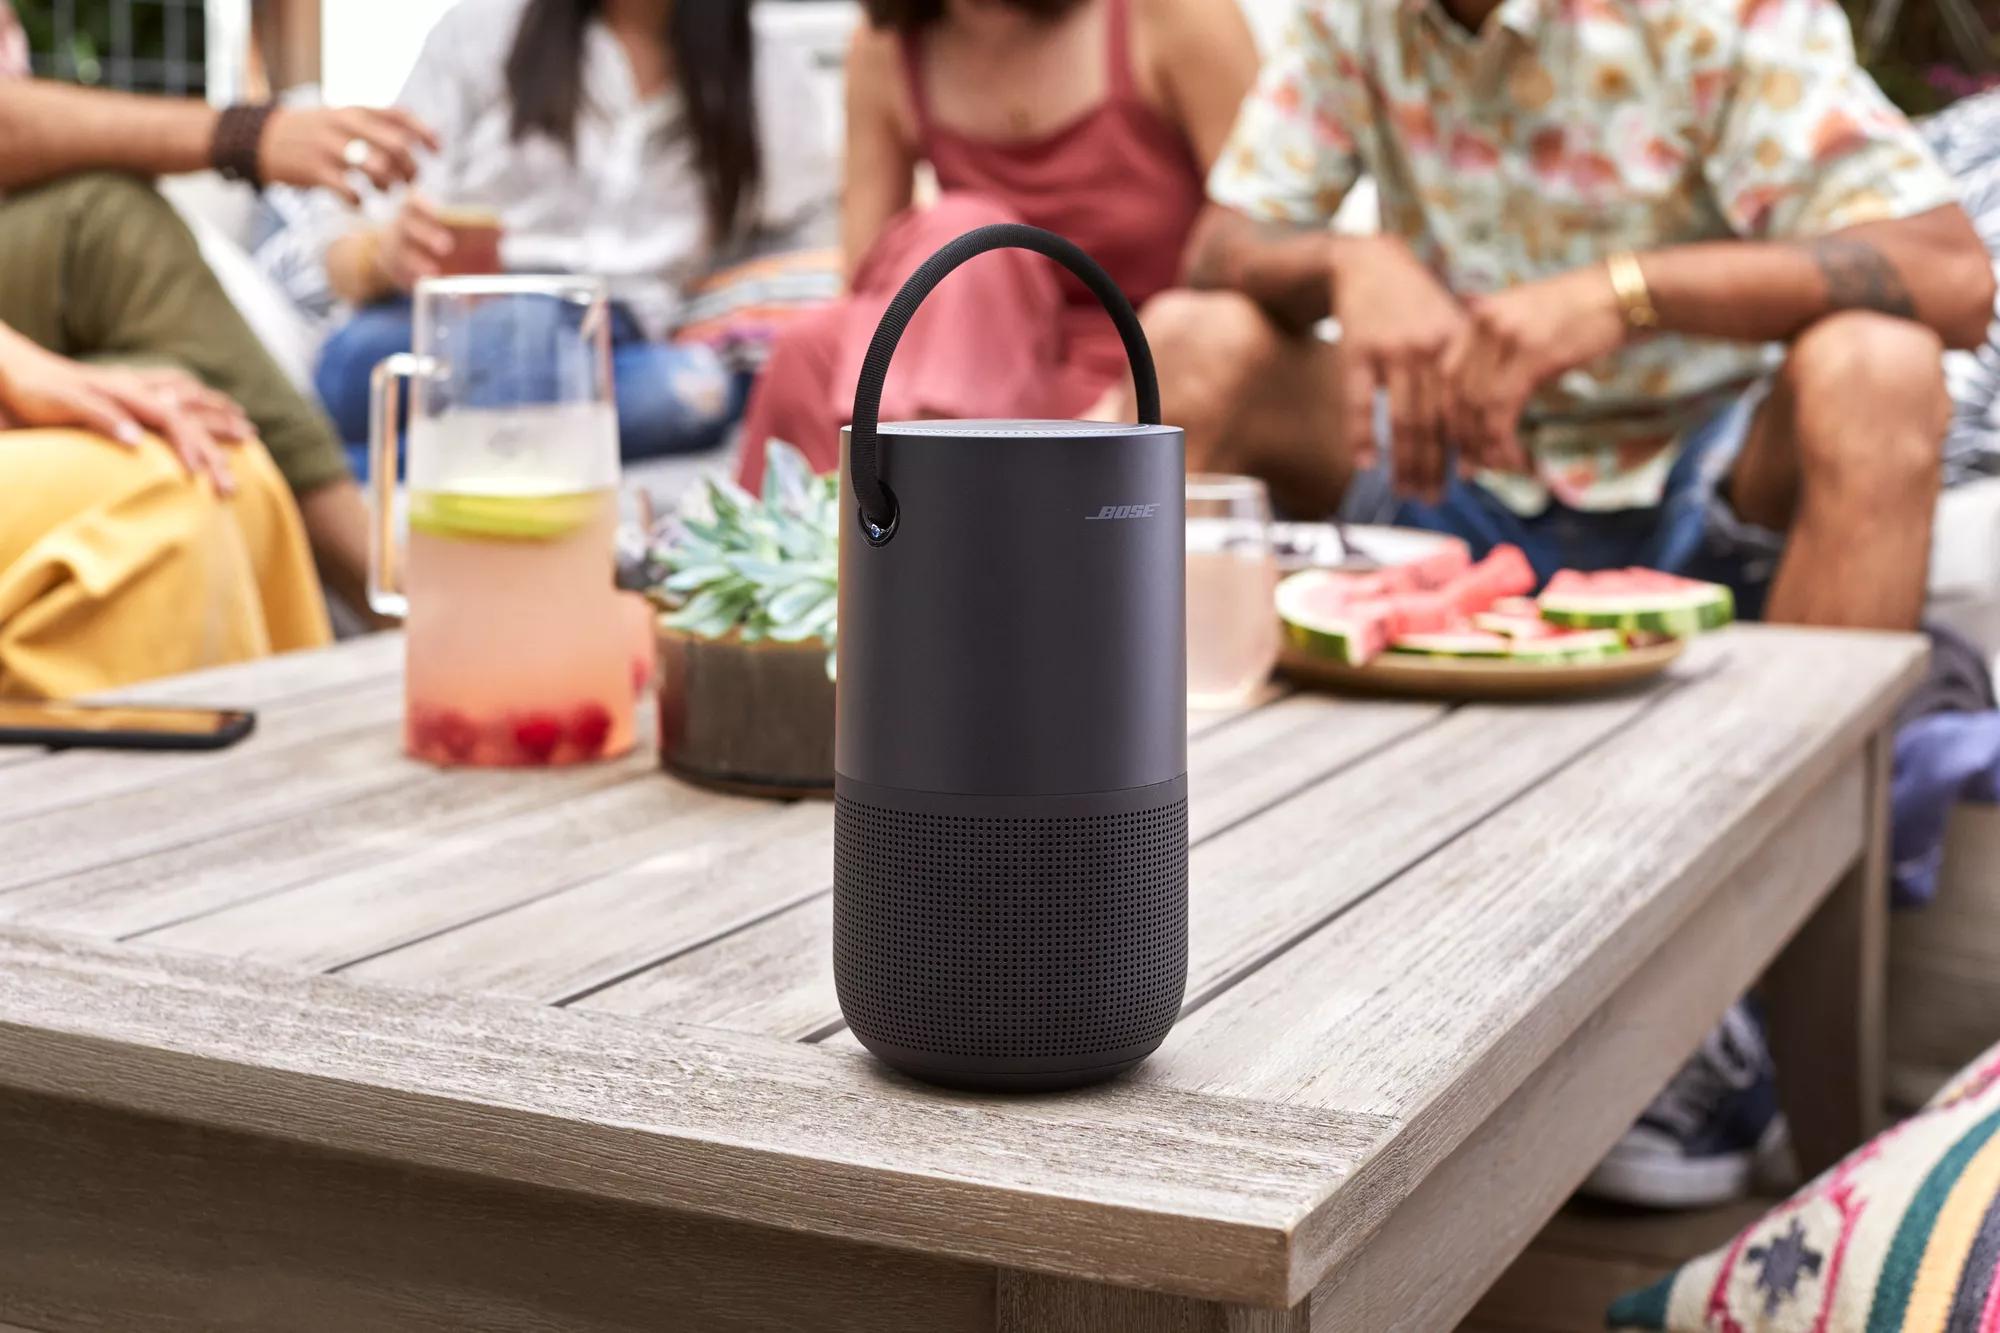 Group of friends eating and drinking outside while listening to music on Bose Portable Smart Speaker